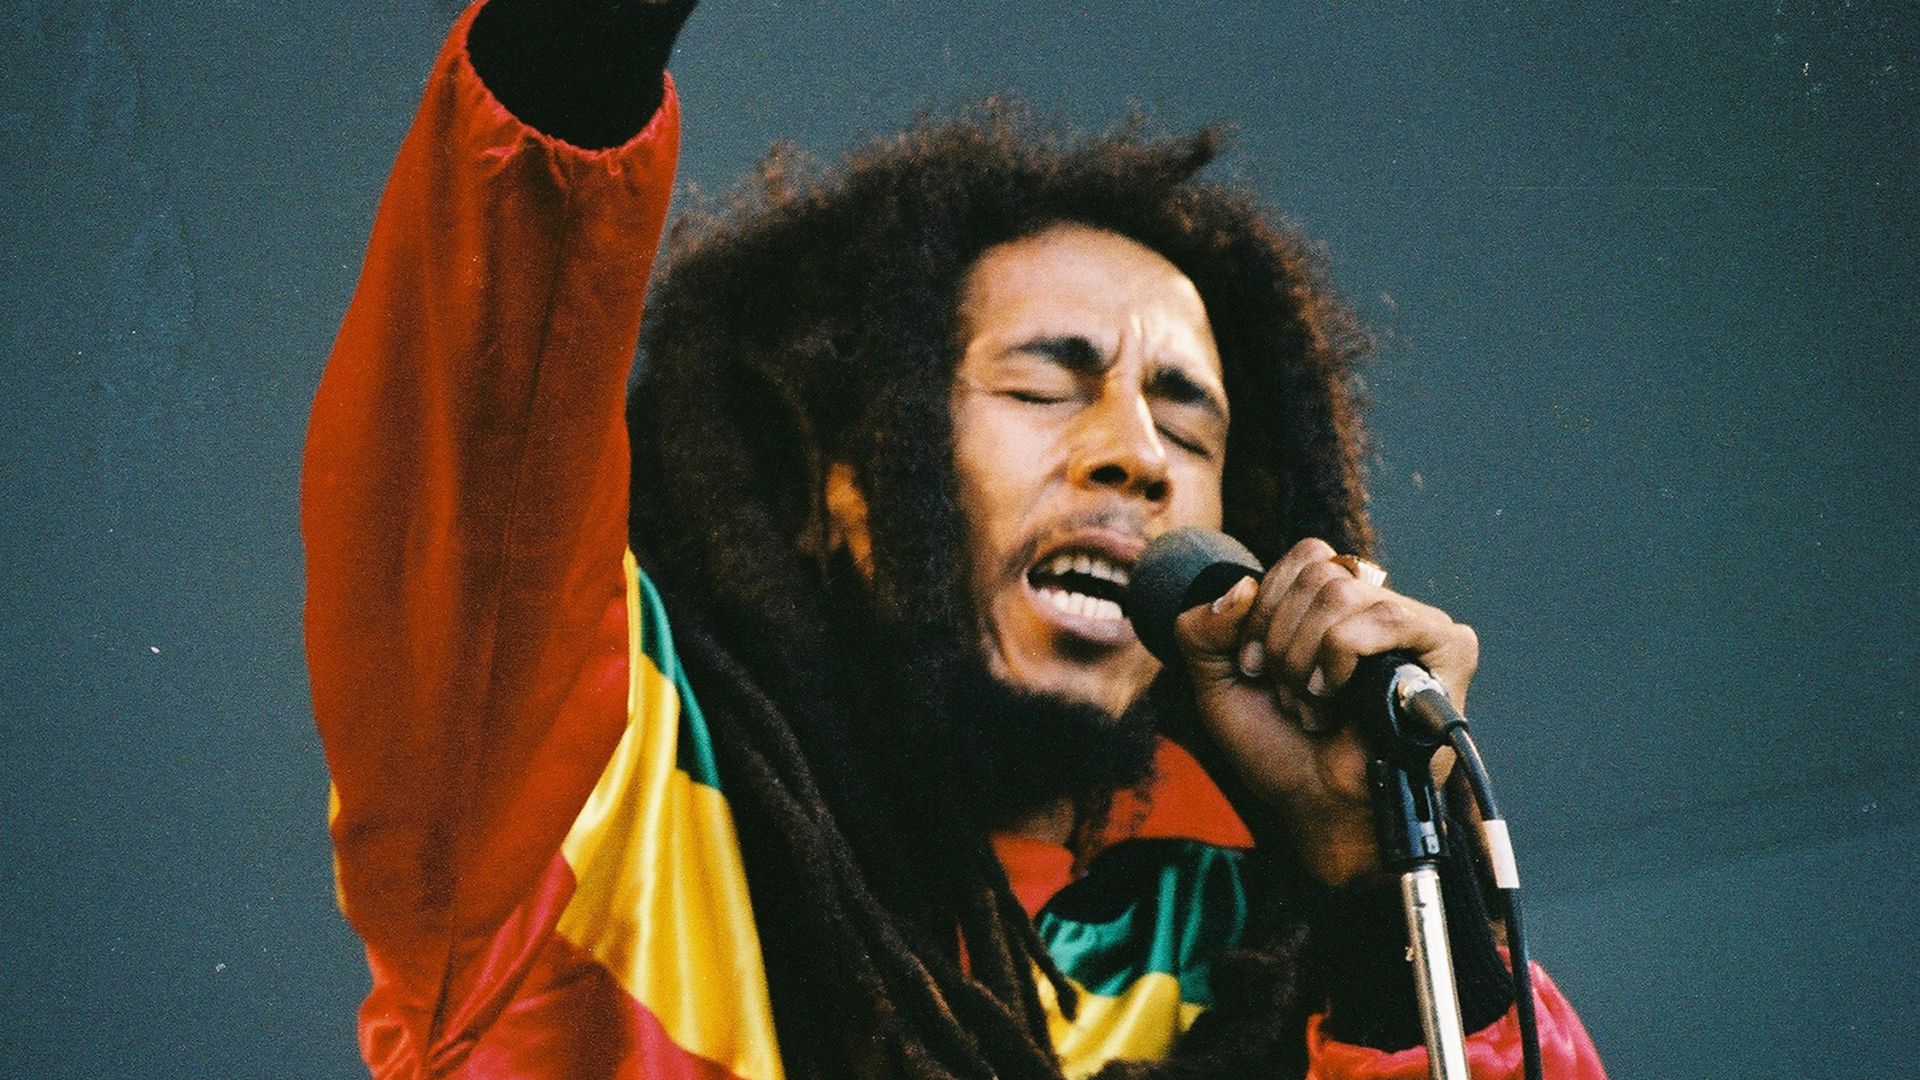 Bob Marley performing on stage in 1980. 